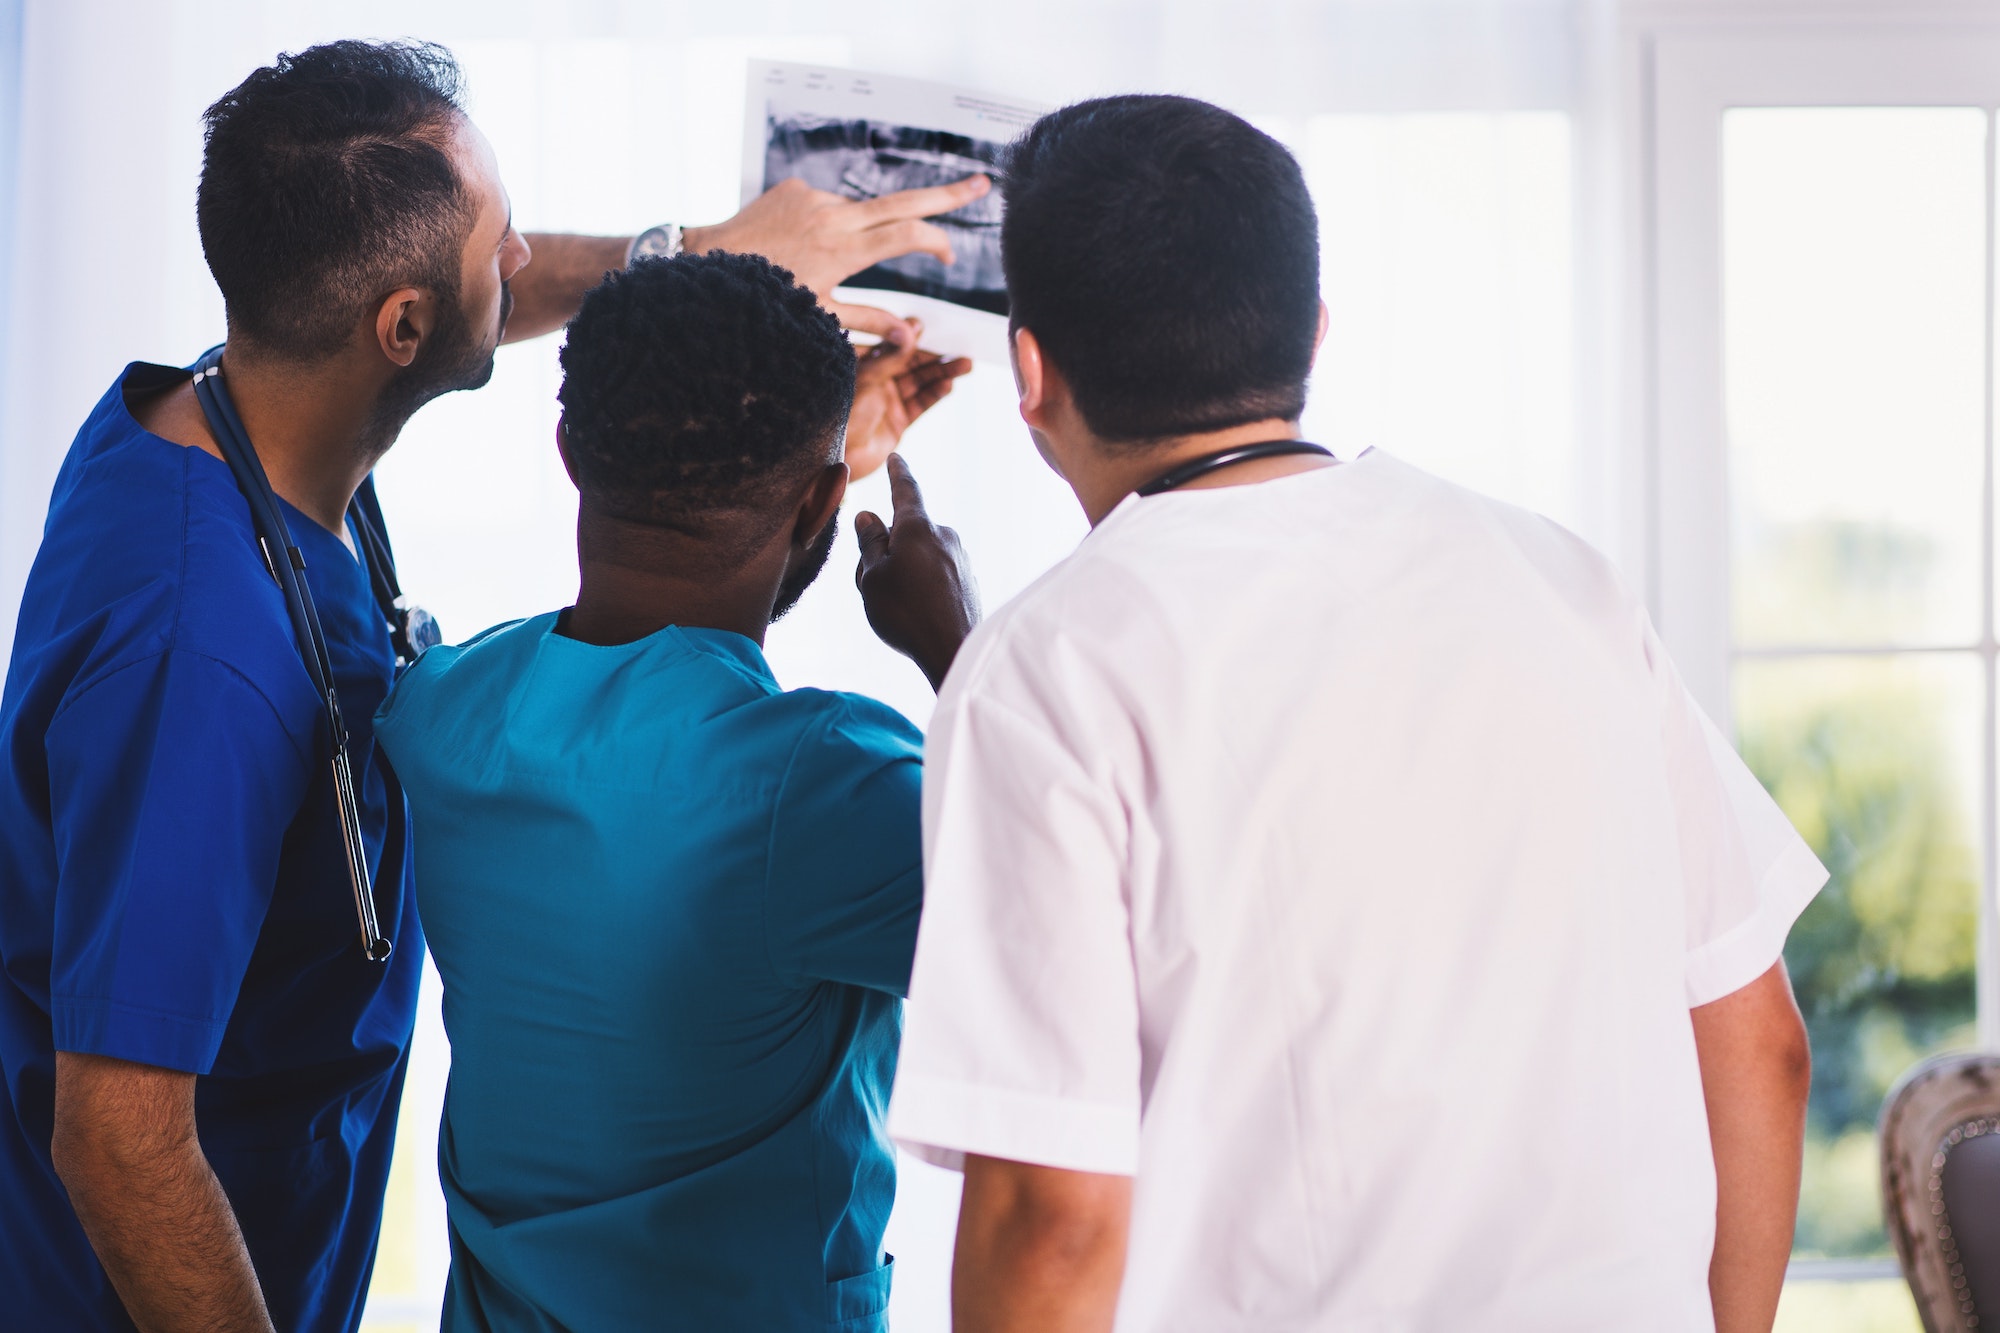 Three doctors of color wearing different colored scrubs looking intently at an x-ray in a hospital